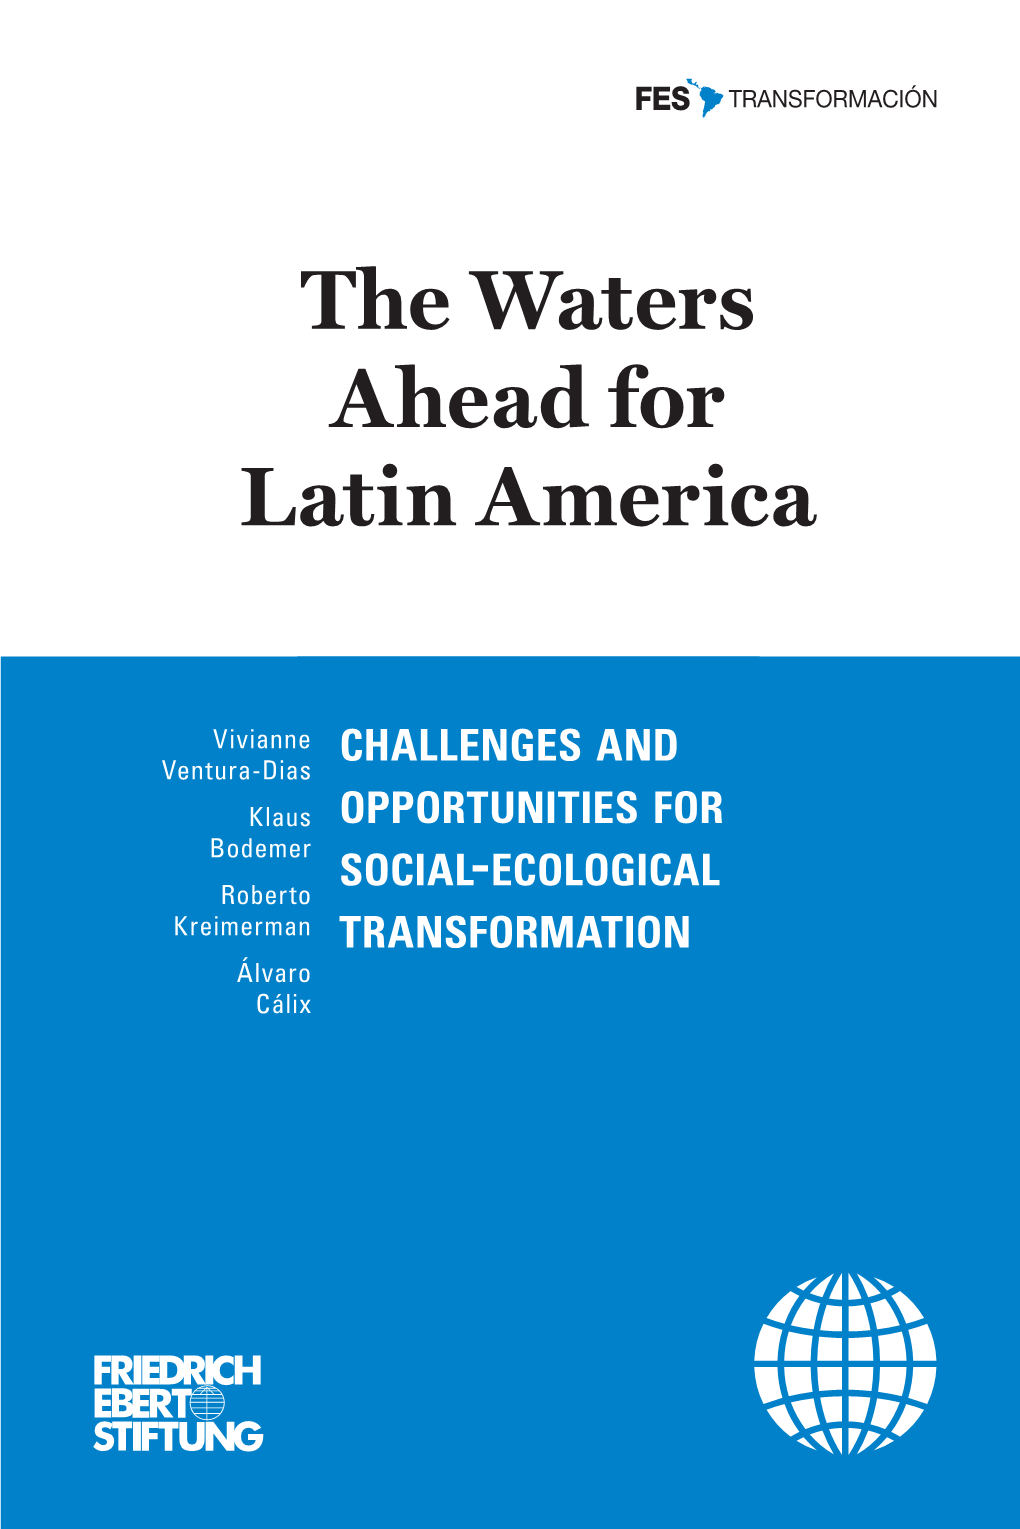 The Waters Ahead for Latin America